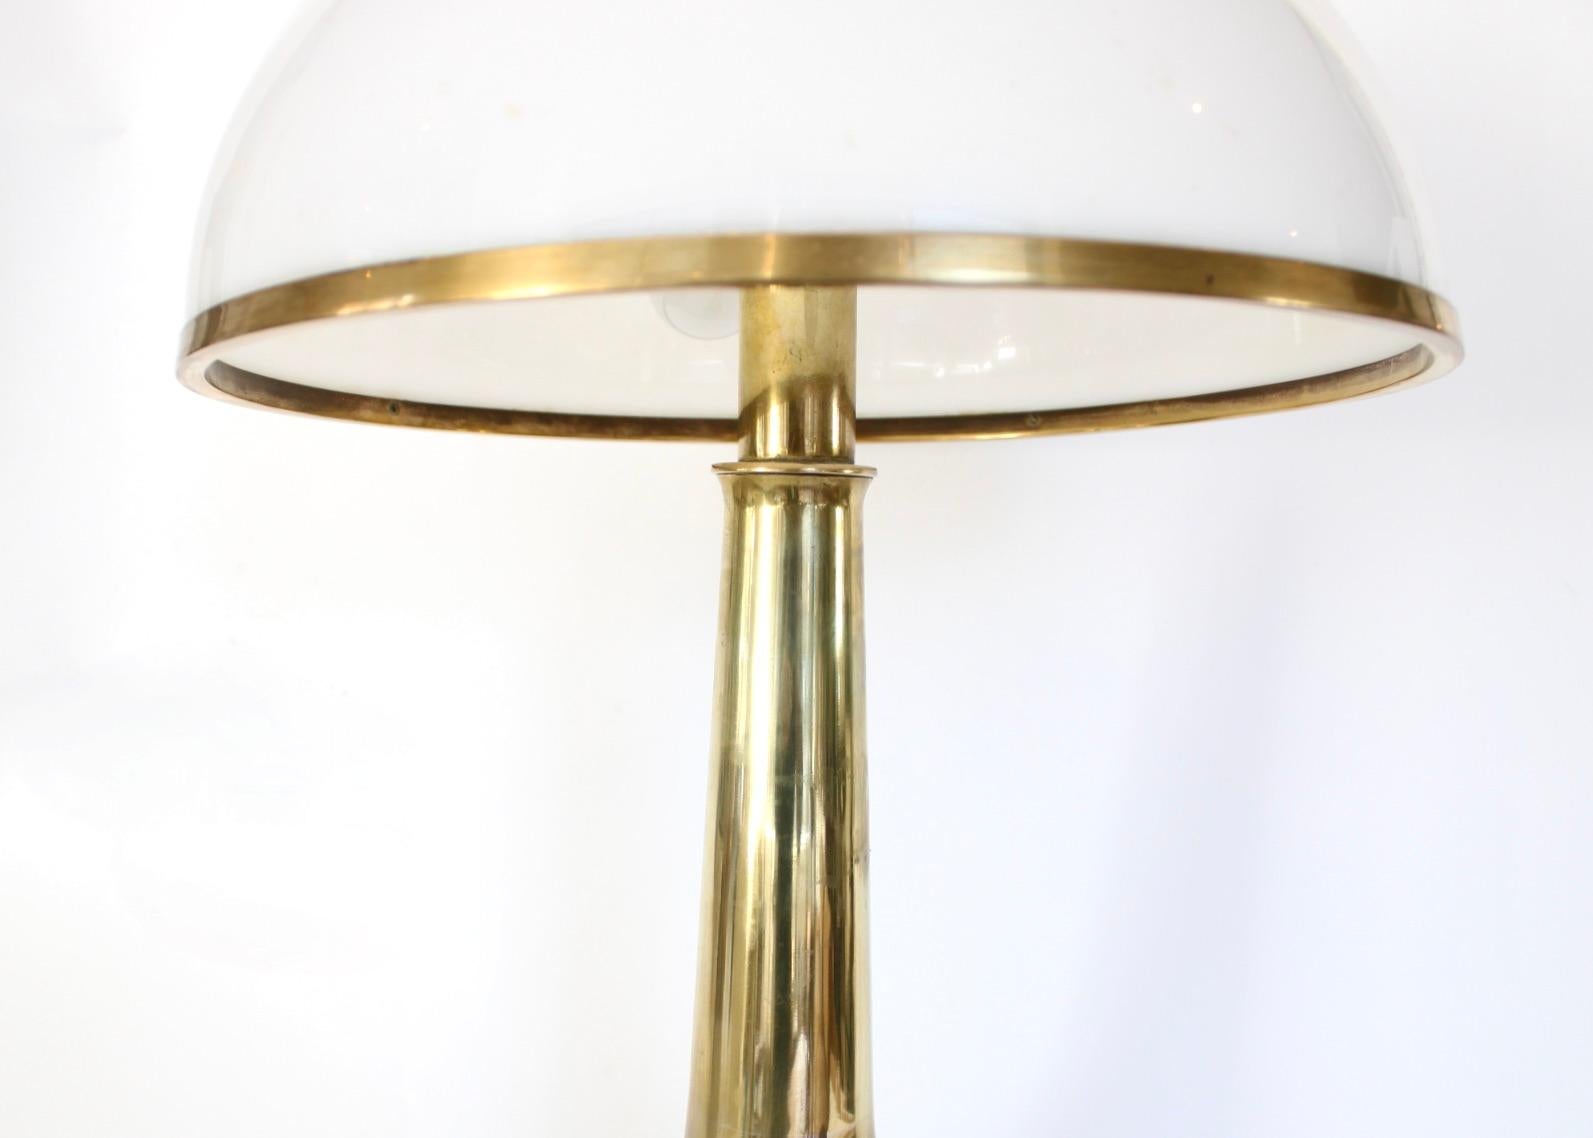 Brass Gabriella Crespi Table Lamp Model Fungo Signed Vintage For Sale